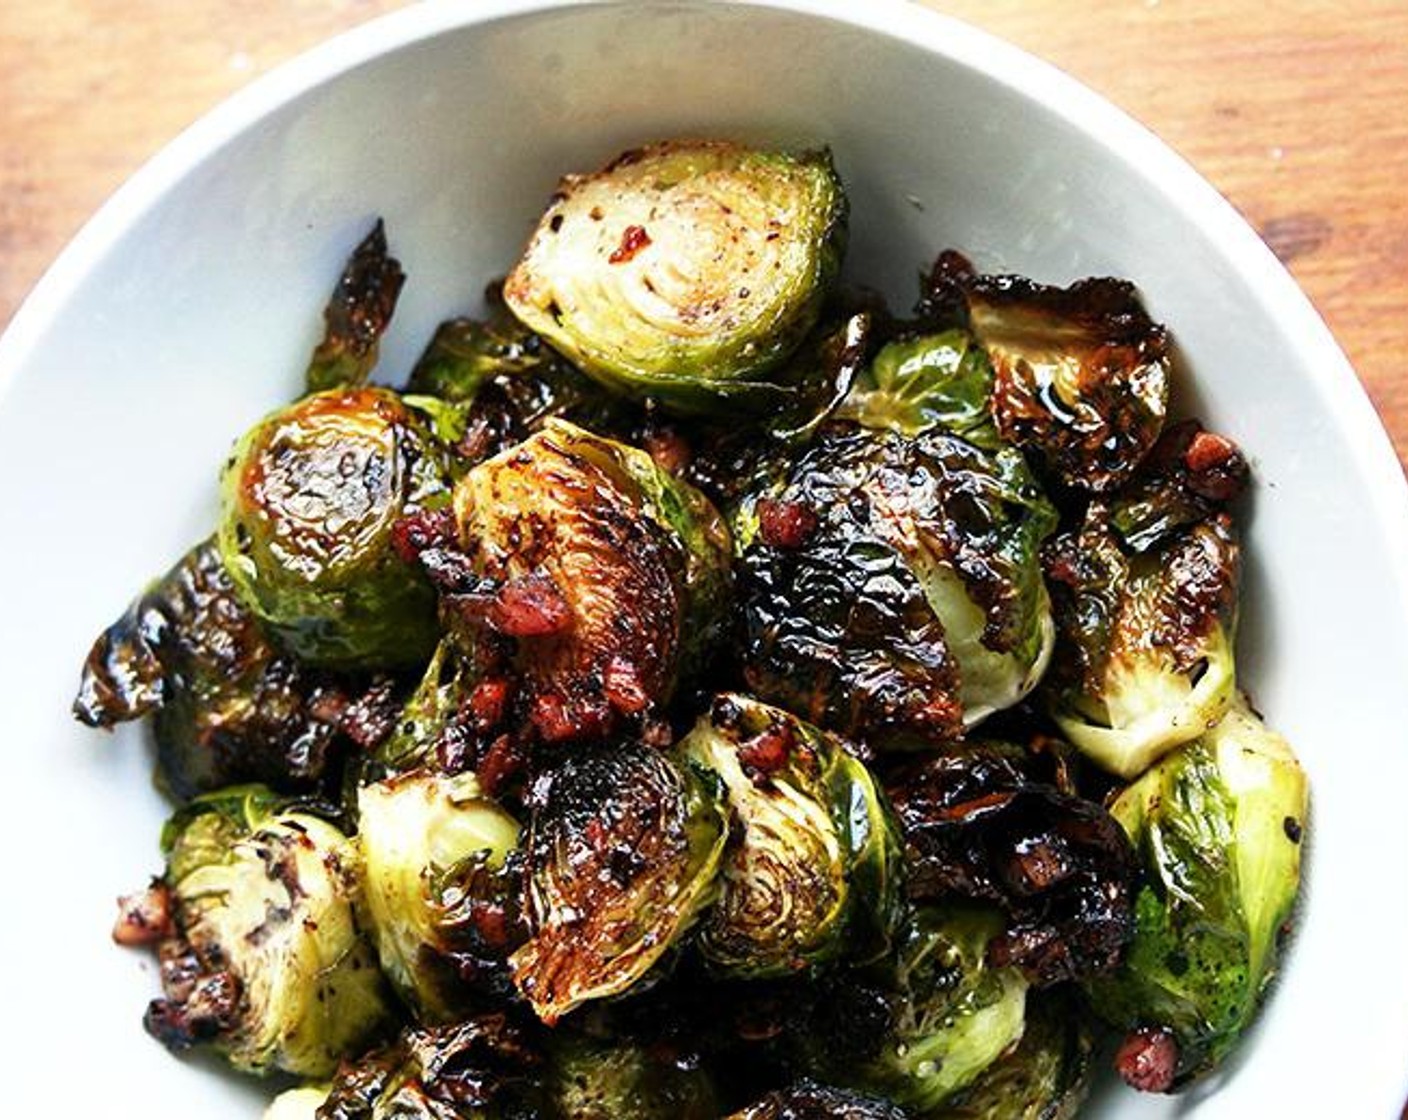 Ina Garten's Balsamic Brussels Sprouts